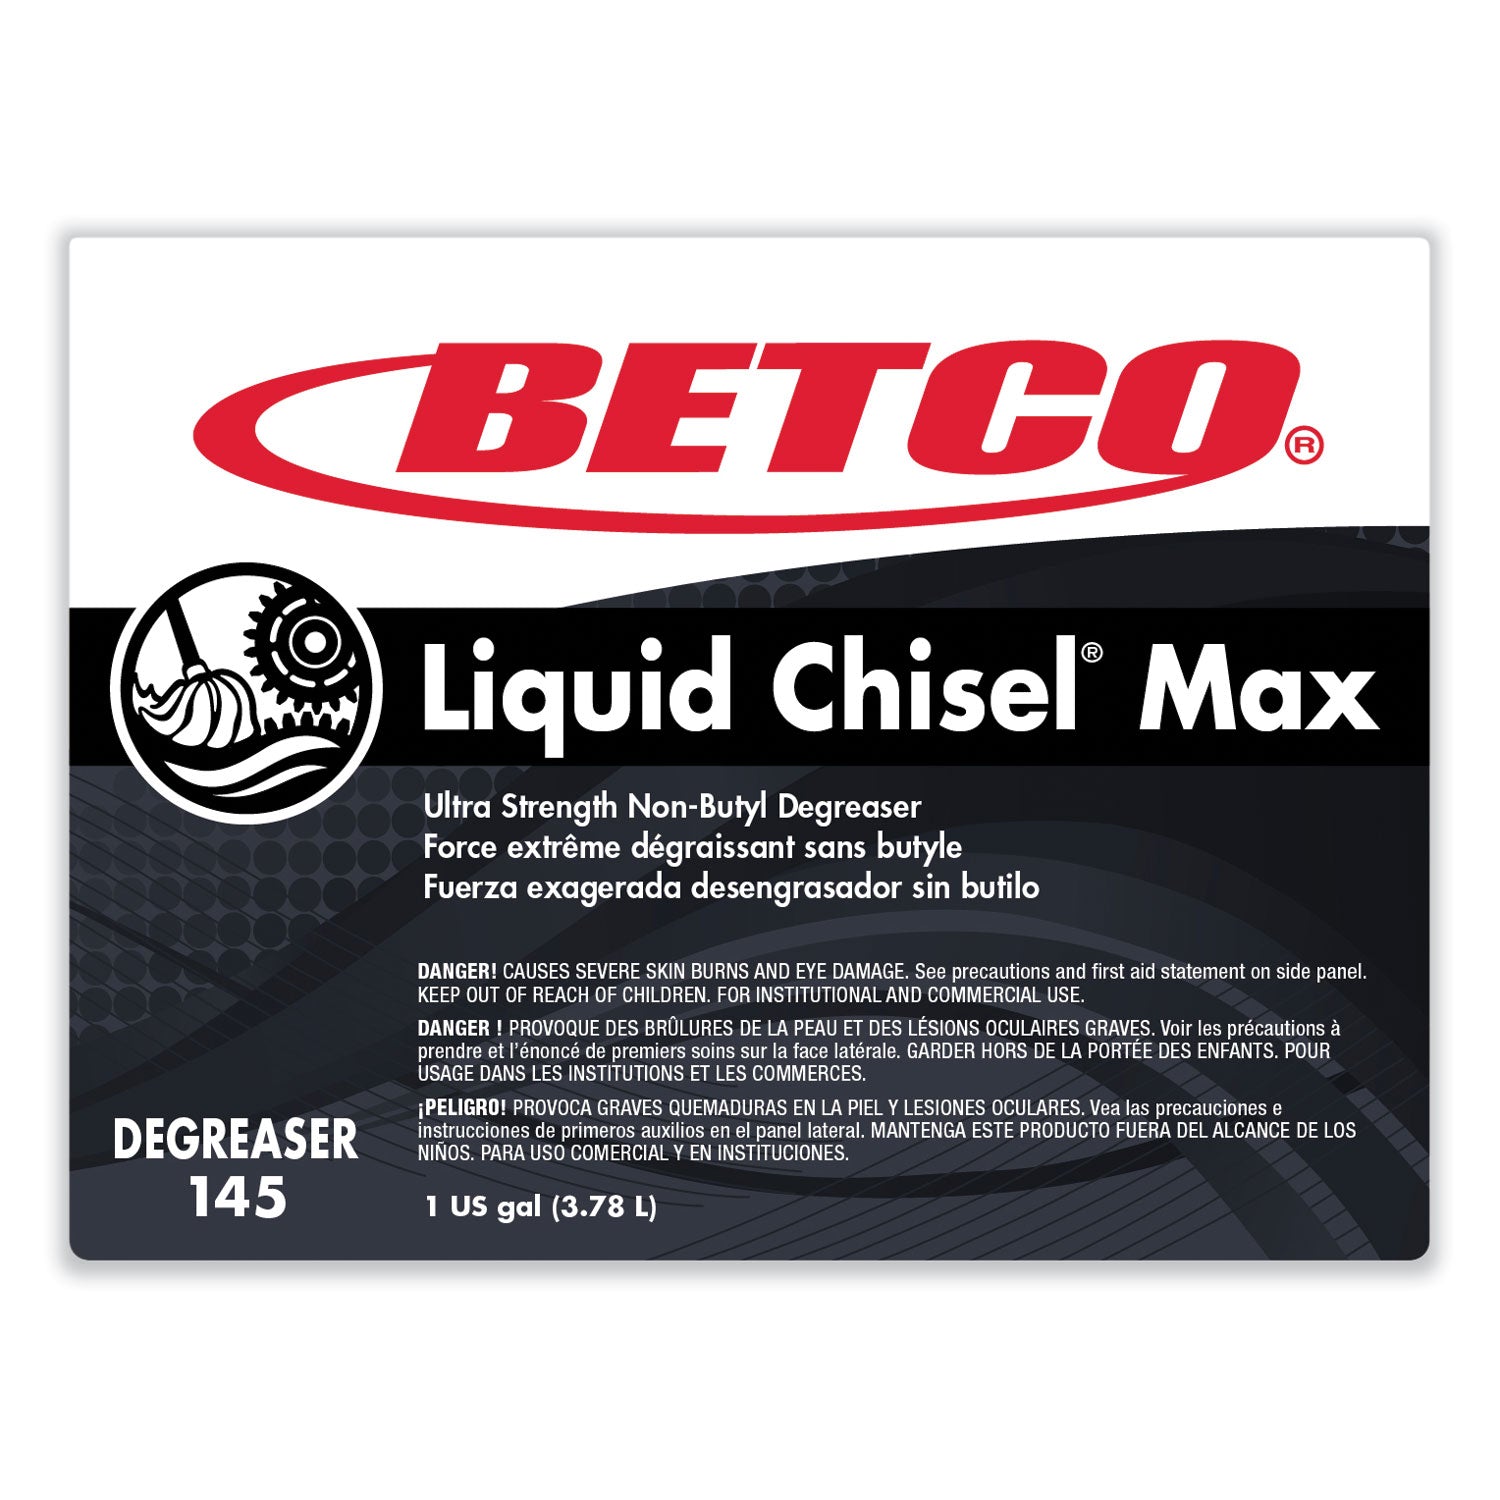 liquid-chisel-max-non-butyl-degreaser-characteristic-scent-1-gal-bottle-4-carton_bet1450400 - 5